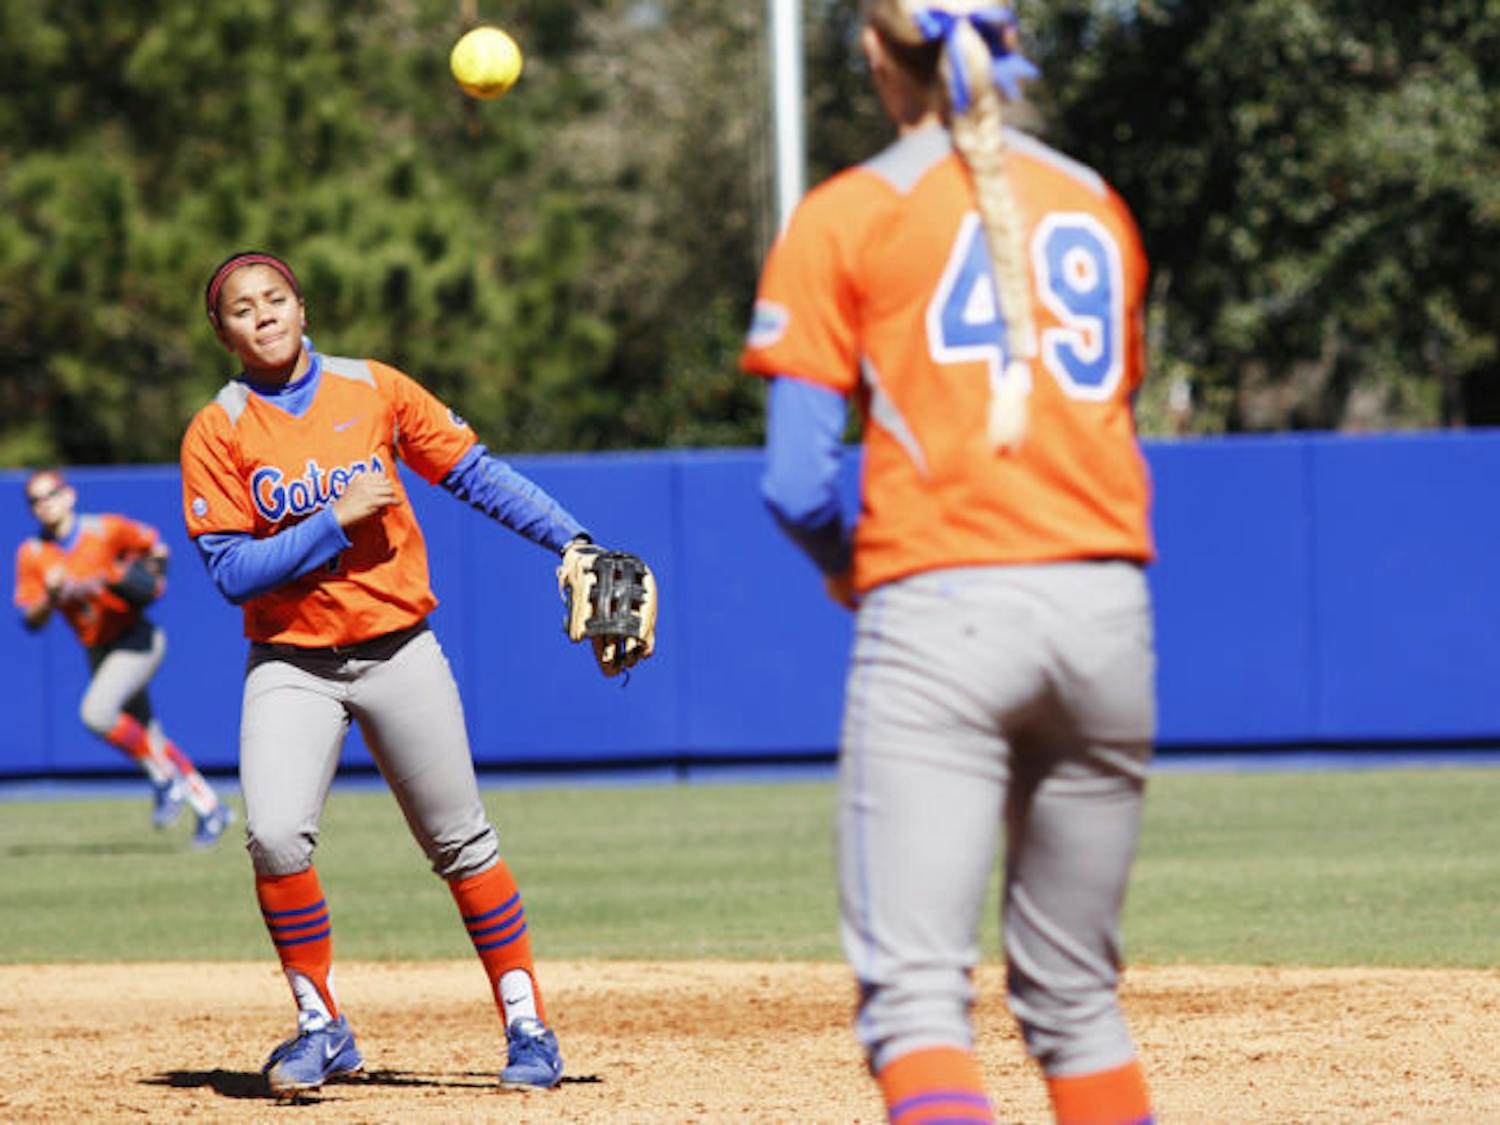 Freshman infielder Kelsey Stewart (7) throws a ball to freshman first baseman Taylor Schwarz (49) to end an inning during Florida’s 9-1 win over UNC Wilmington on Feb. 17 at Katie Seashole Pressly Stadium. Stewart is one of Florida's key underclassmen who have fueled the team's success this season.&nbsp;